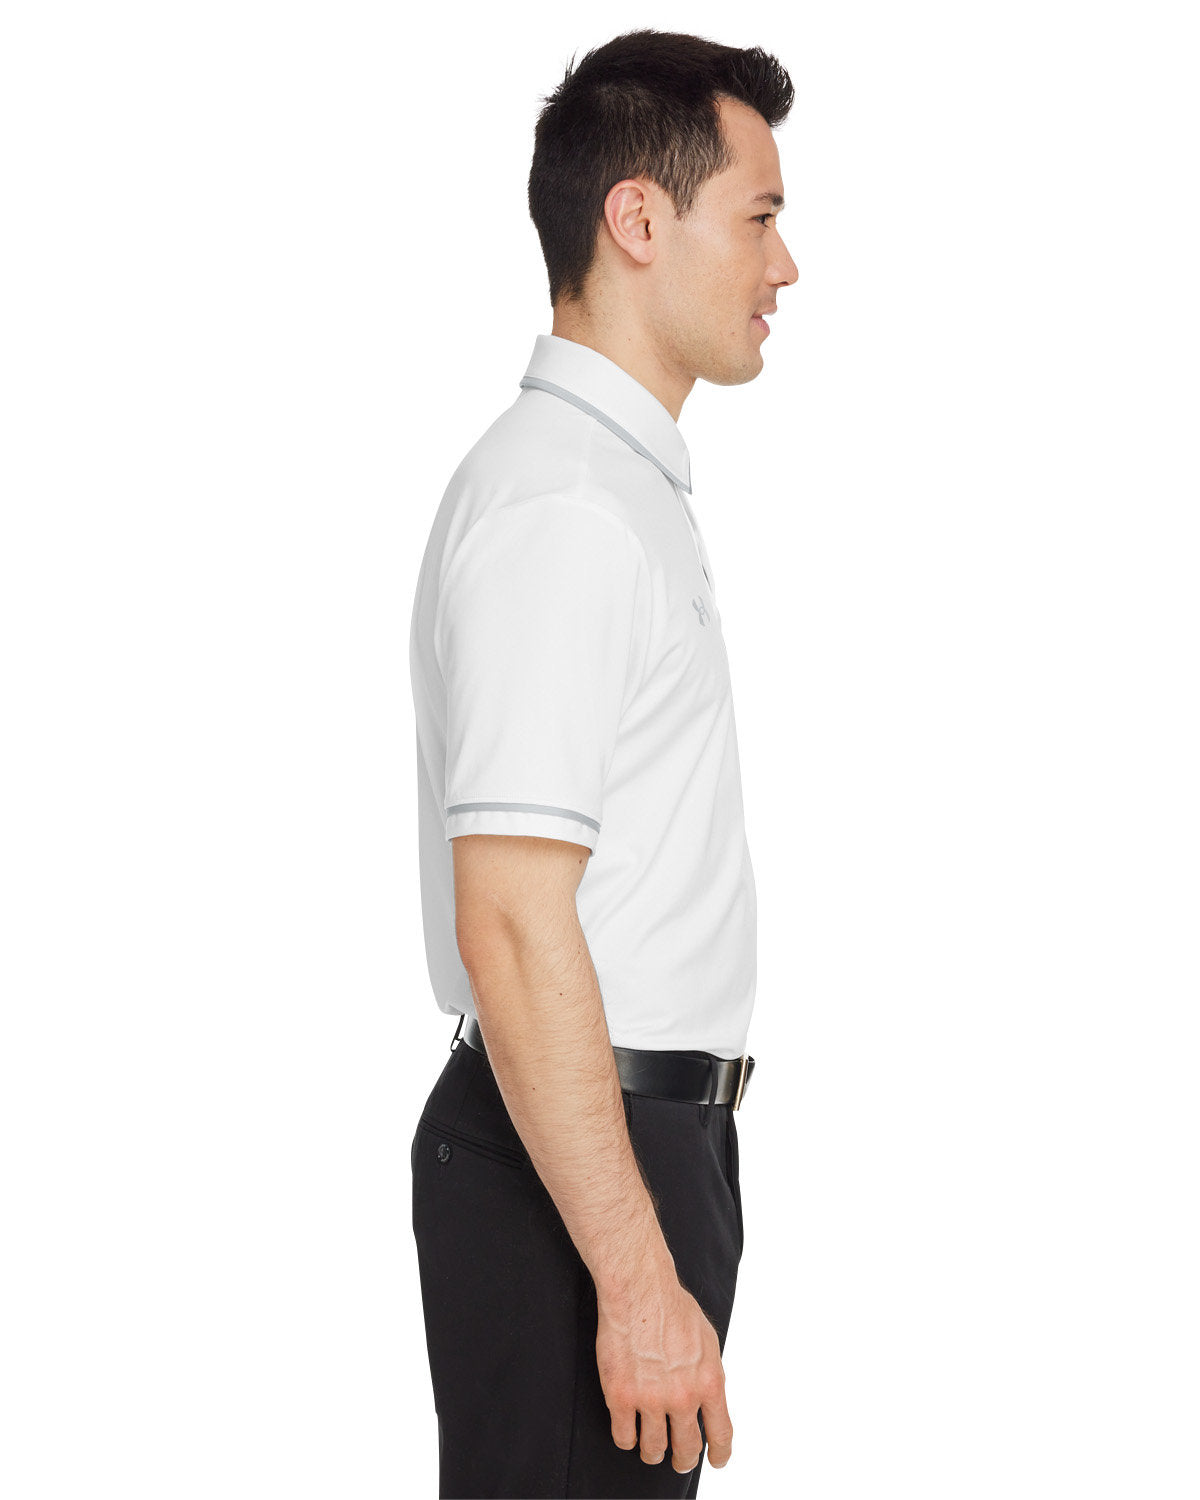 Under Armour Men's Tipped Teams Performance Polo, White